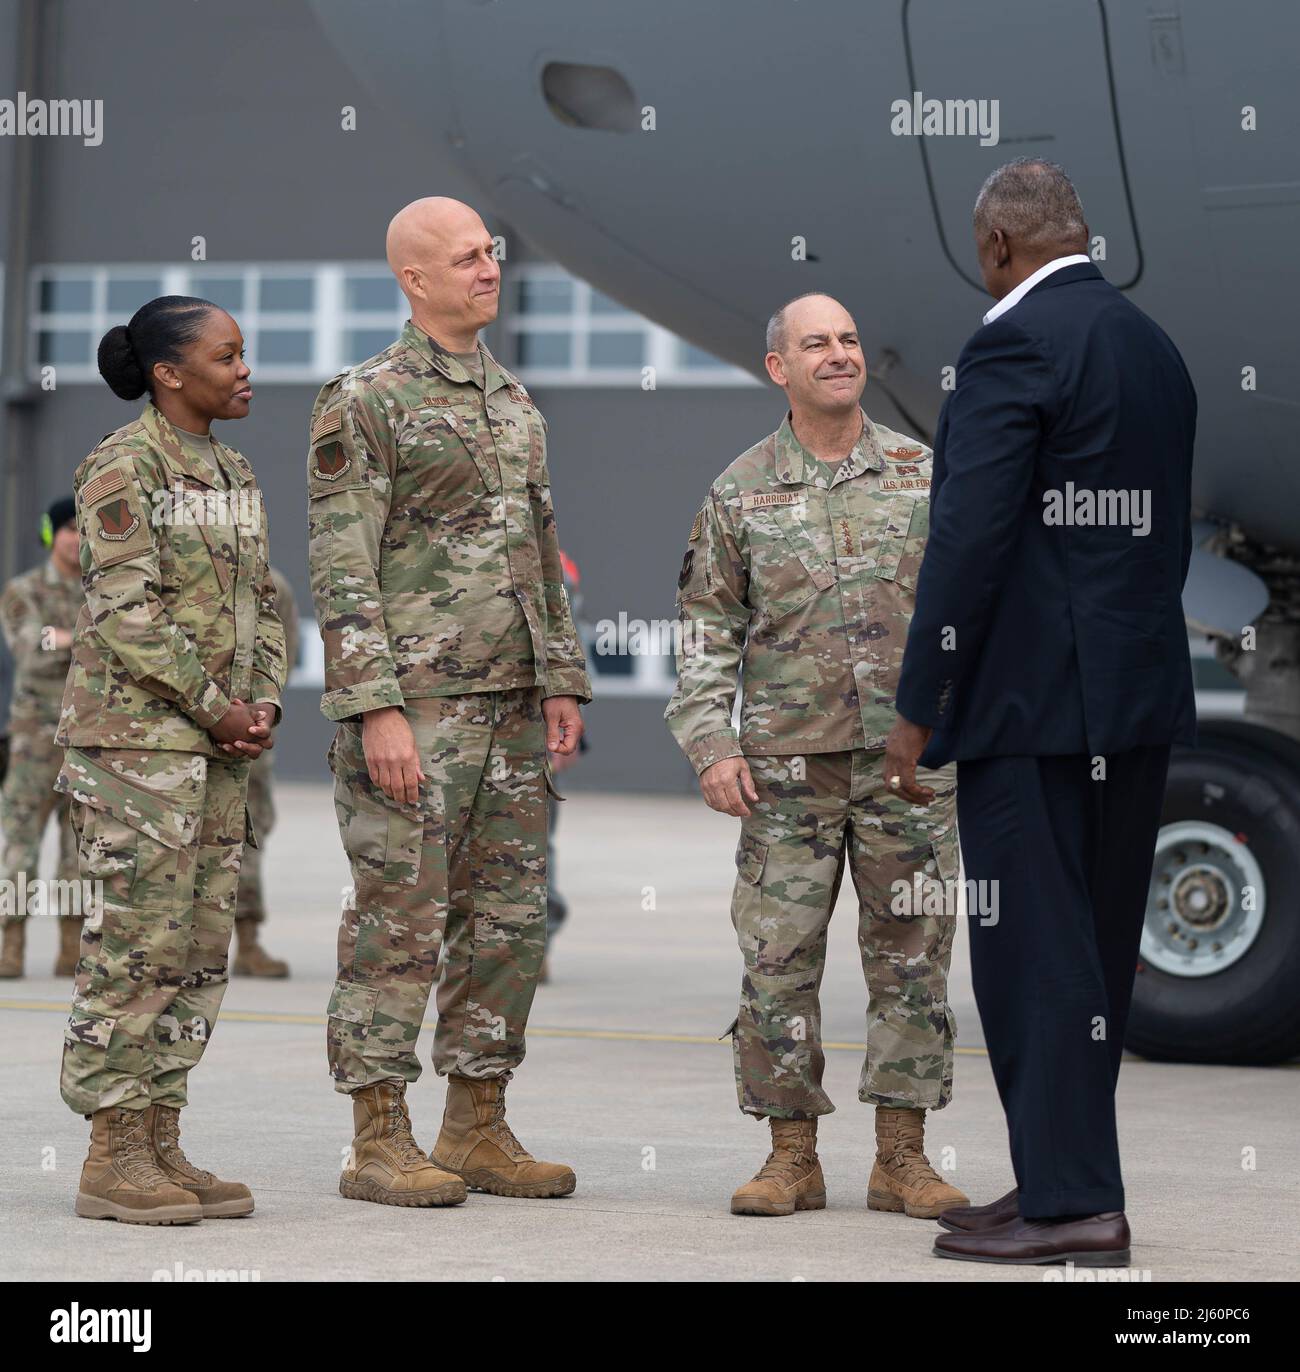 U.S. Secretary of Defense Lloyd Austin III (right) is greeted by (right to left) U.S. Air Force Gen. Jeffrey L. Harrigian, U.S. Air Forces in Europe and Air Forces Africa commander, Brig. Gen. Joshua Olson, 86th Airlift Wing commander and 86 AW Command Chief Master Sgt. Charmaine Kelley, at Ramstein Air Base, Germany, April 25, 2022. Secretary Austin invited Ministers of Defense and senior military officials to Ramstein this week to discuss the ongoing crisis in Ukraine and various issues facing U.S. allies and partners.  (U.S. Air Force photo by Airman 1st Class Edgar Grimaldo) Stock Photo